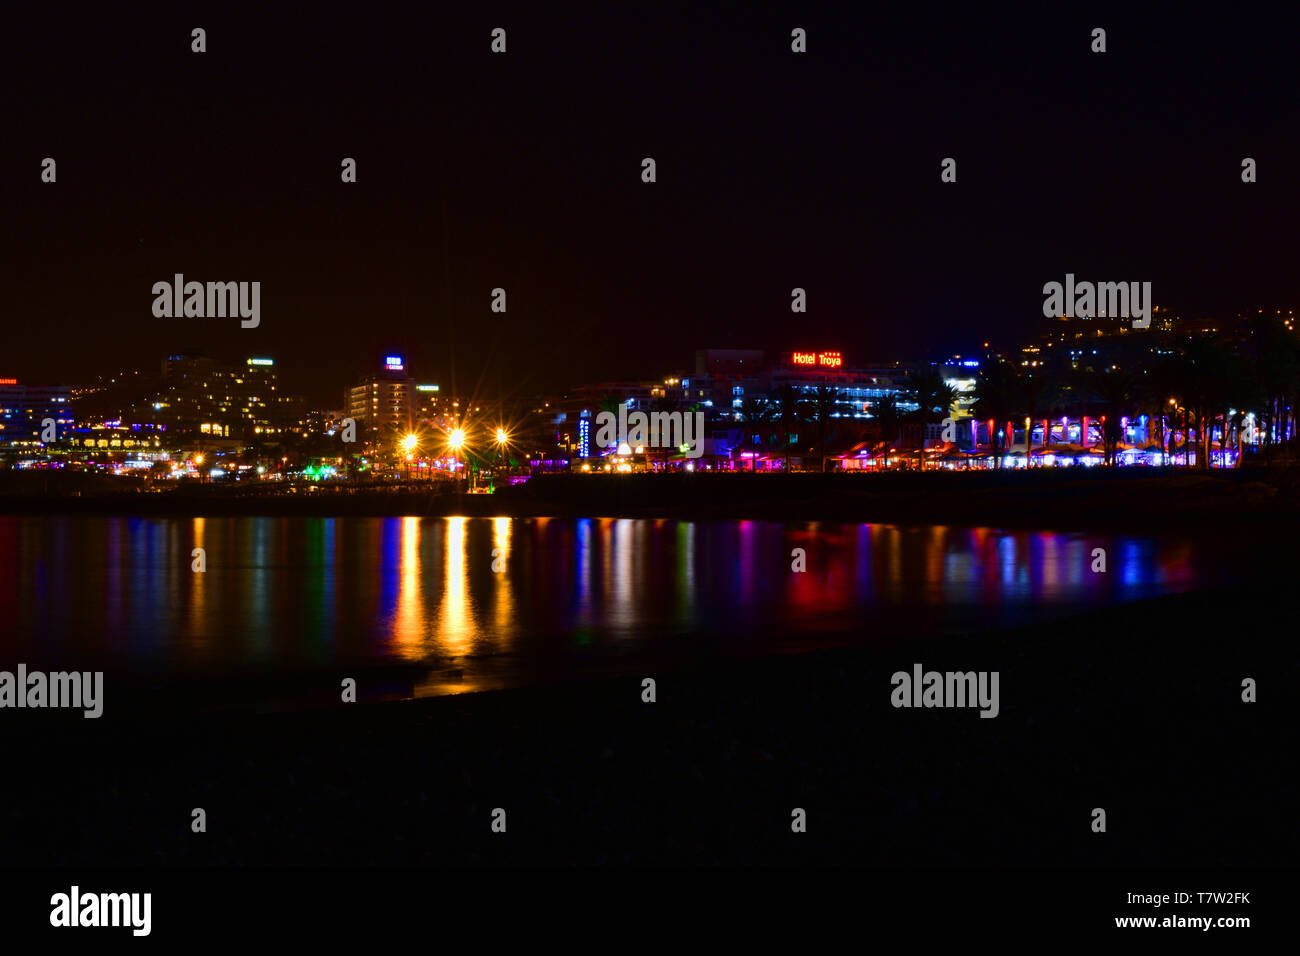 Playa De Las Americas Nightlife High Resolution Stock Photography and  Images - Alamy